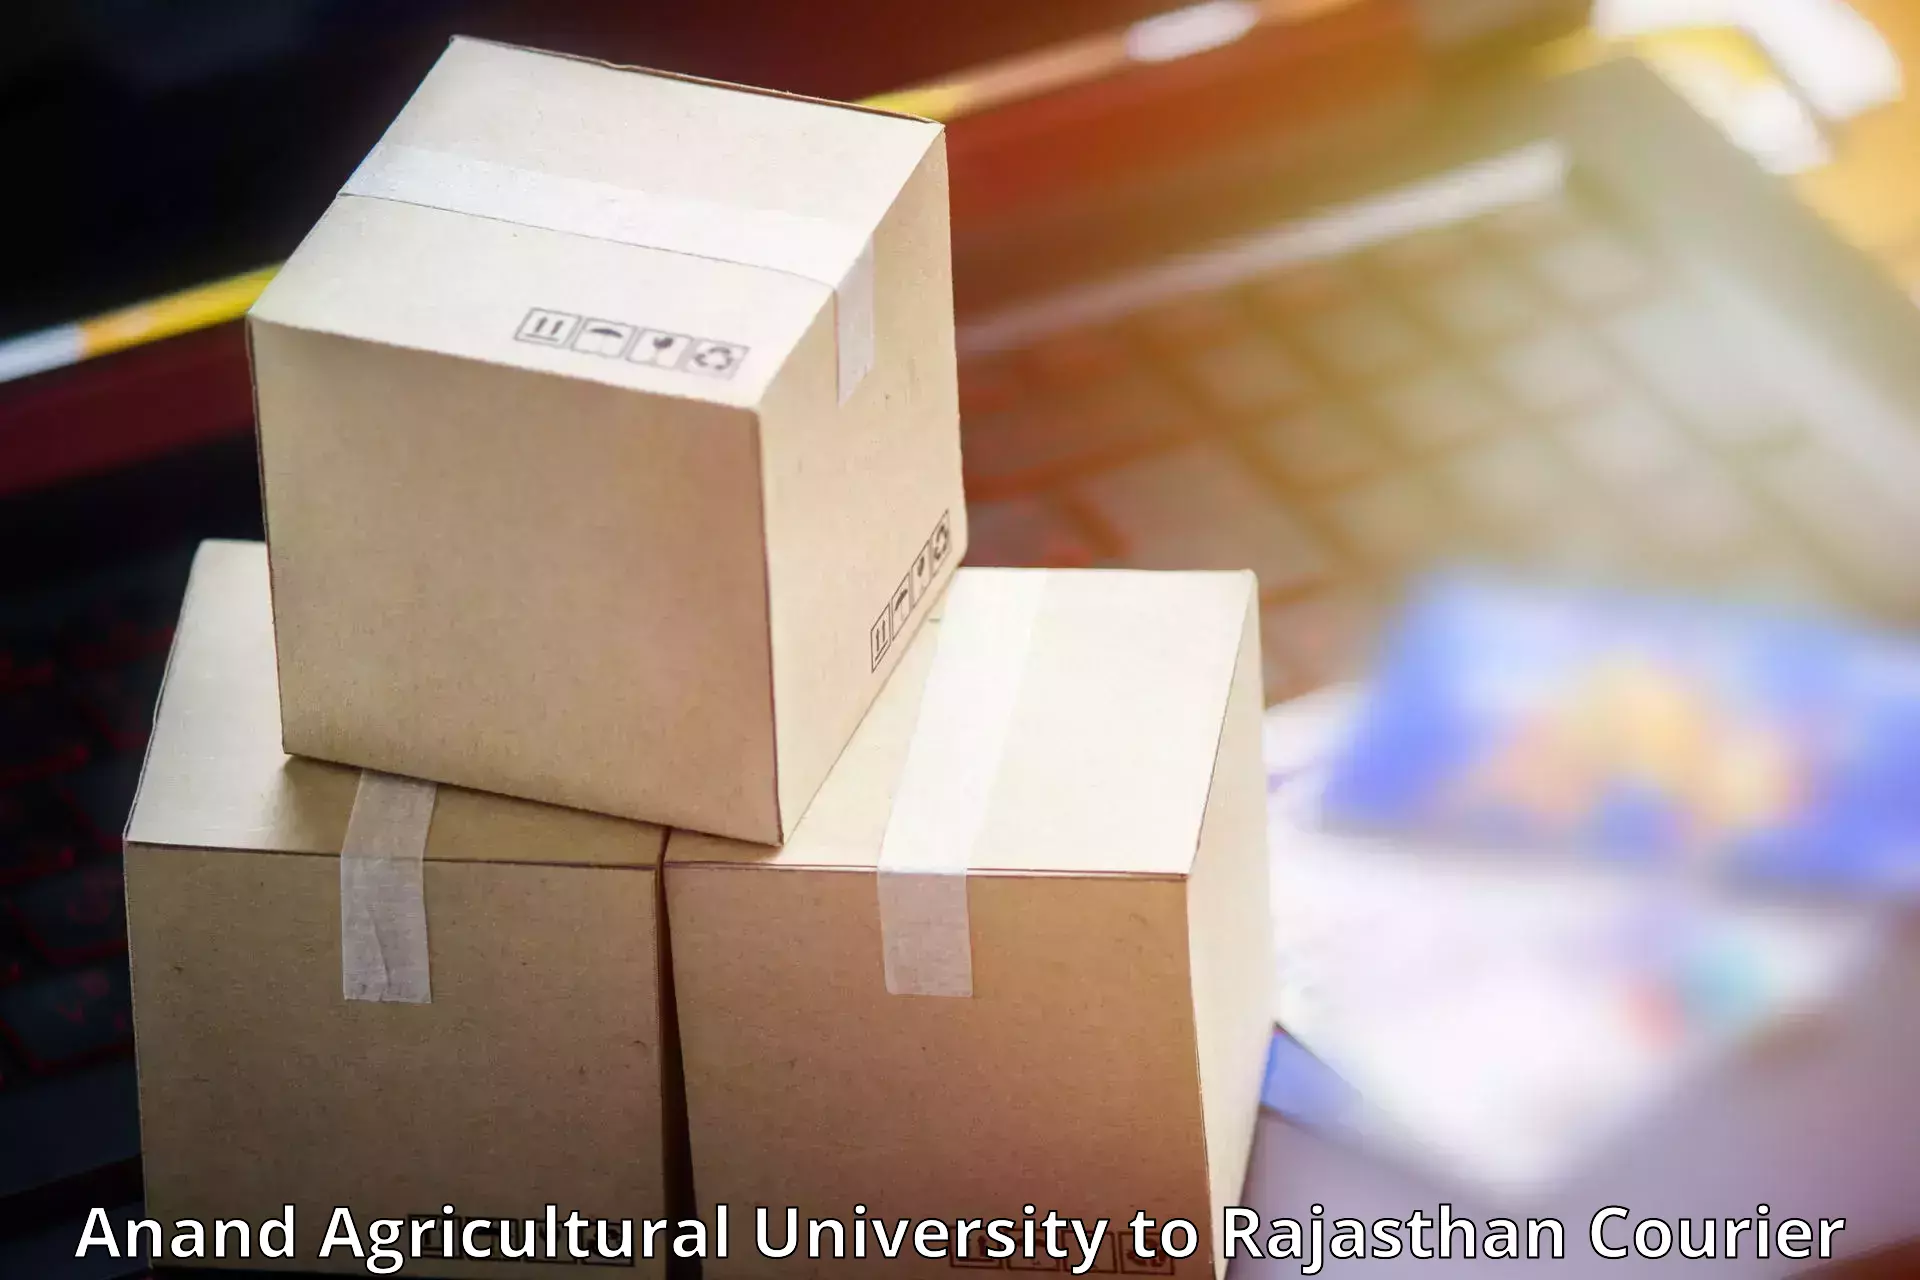 Return courier service Anand Agricultural University to Deenwa